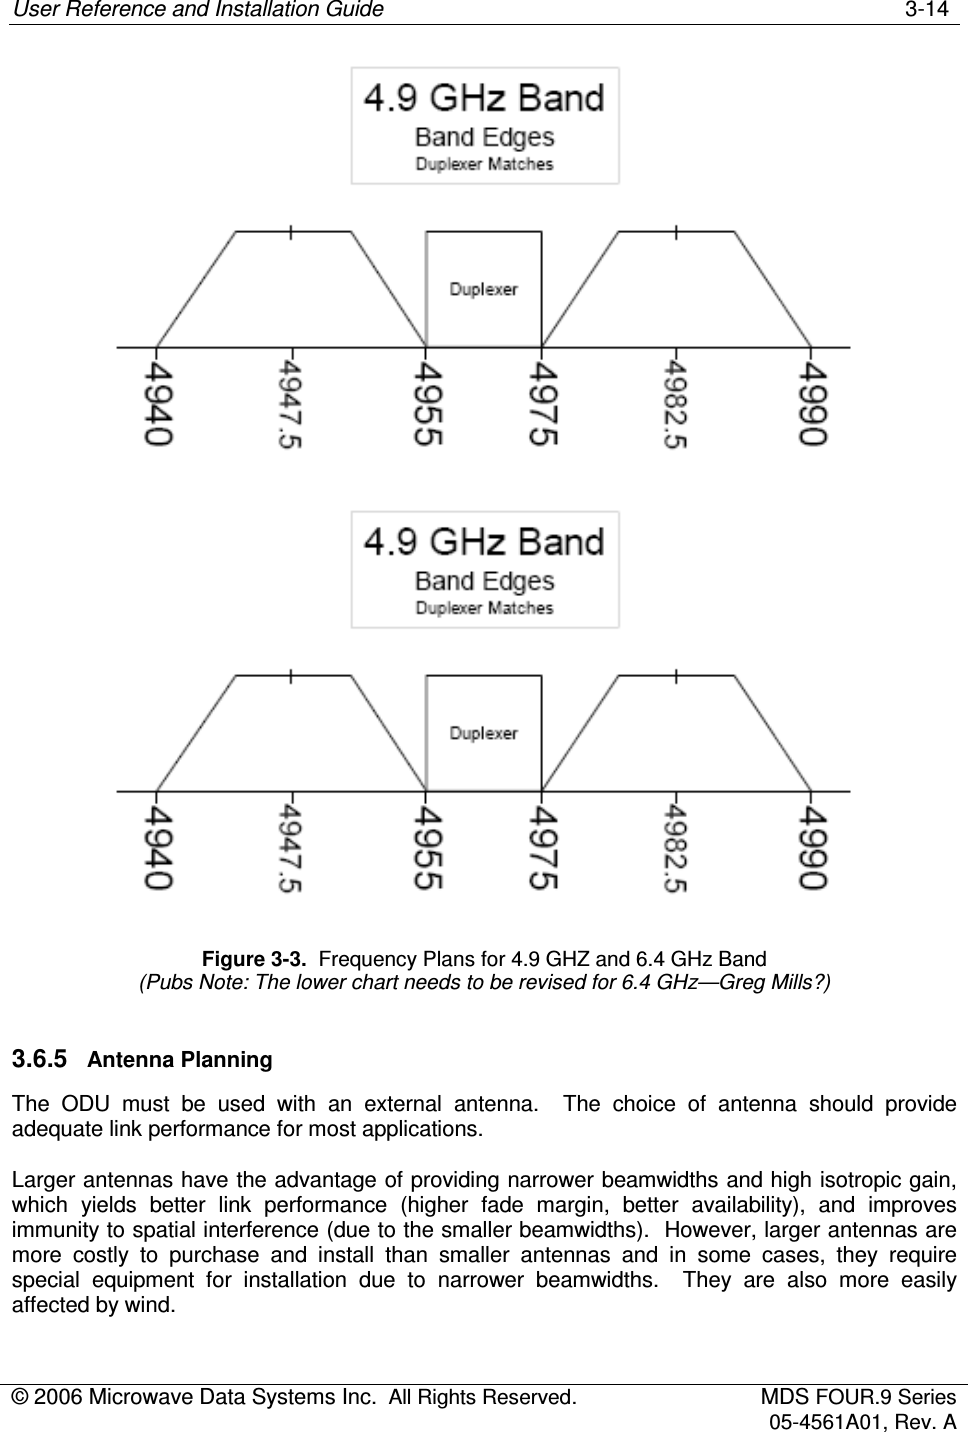 User Reference and Installation Guide    3-14 © 2006 Microwave Data Systems Inc.  All Rights Reserved.  MDS FOUR.9 Series 05-4561A01, Rev. A    Figure 3-3.  Frequency Plans for 4.9 GHZ and 6.4 GHz Band (Pubs Note: The lower chart needs to be revised for 6.4 GHz—Greg Mills?) 3.6.5  Antenna Planning The  ODU  must  be  used  with  an  external  antenna.    The  choice  of  antenna  should  provide adequate link performance for most applications. Larger antennas have the advantage of providing narrower beamwidths and high isotropic gain, which  yields  better  link  performance  (higher  fade  margin,  better  availability),  and  improves immunity to spatial interference (due to the smaller beamwidths).  However, larger antennas are more  costly  to  purchase  and  install  than  smaller  antennas  and  in  some  cases,  they  require special  equipment  for  installation  due  to  narrower  beamwidths.    They  are  also  more  easily affected by wind. 